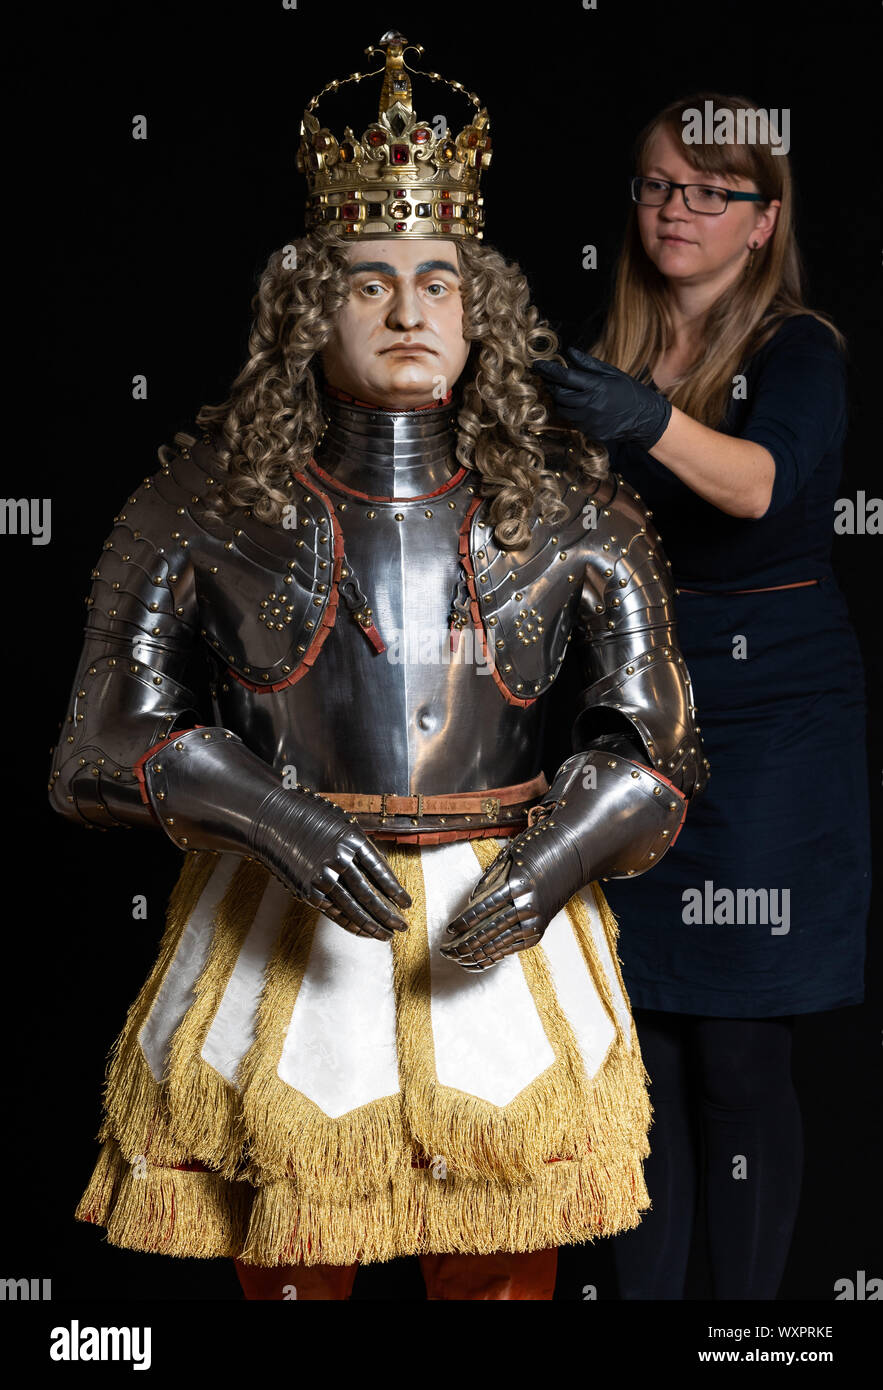 Dresden, Germany. 15th Aug, 2019. Stefanie Penthin, restorer in the armoury of the Staatliche Kunstsammlungen Dresden (SKD), works on the wig on the coronation figure of August the Strong in the coronation ornament of 1697. The figure will be an exhibit of the new exhibition in the royal parade rooms of the Residenzschloss. Credit: Robert Michael/dpa-Zentralbild/dpa/Alamy Live News Stock Photo